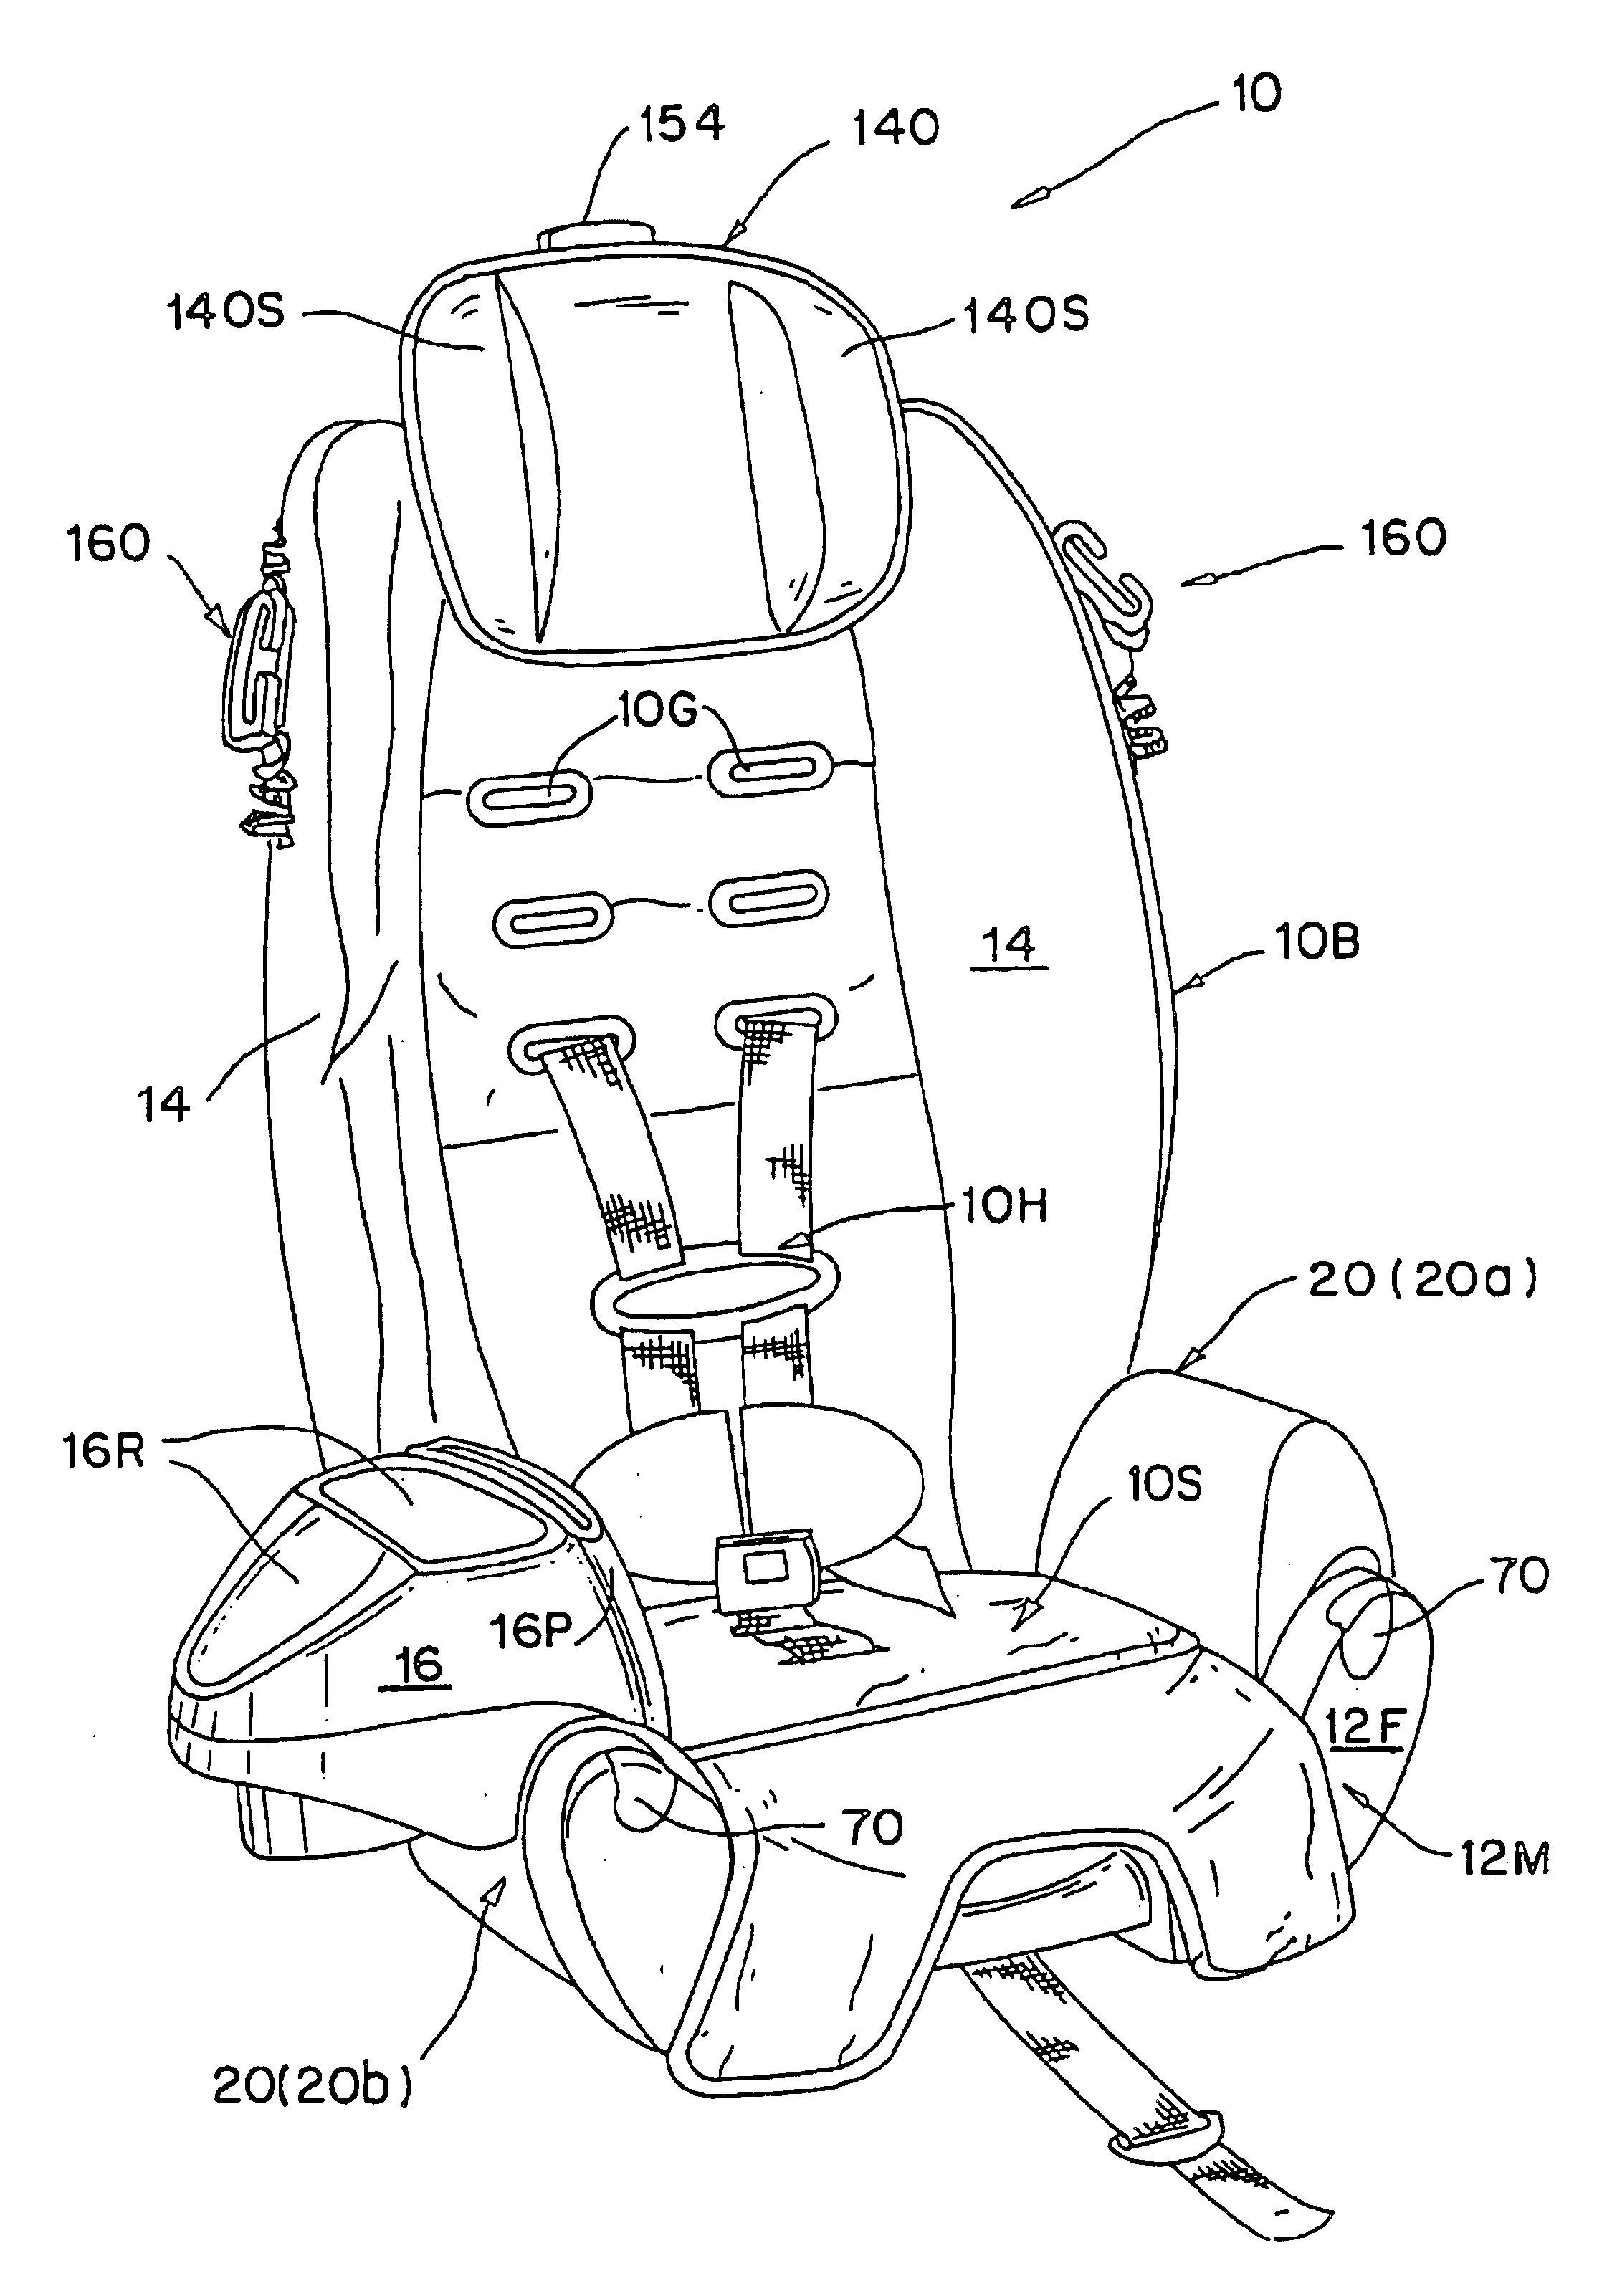 Adjustable child seat for toddlers to small children